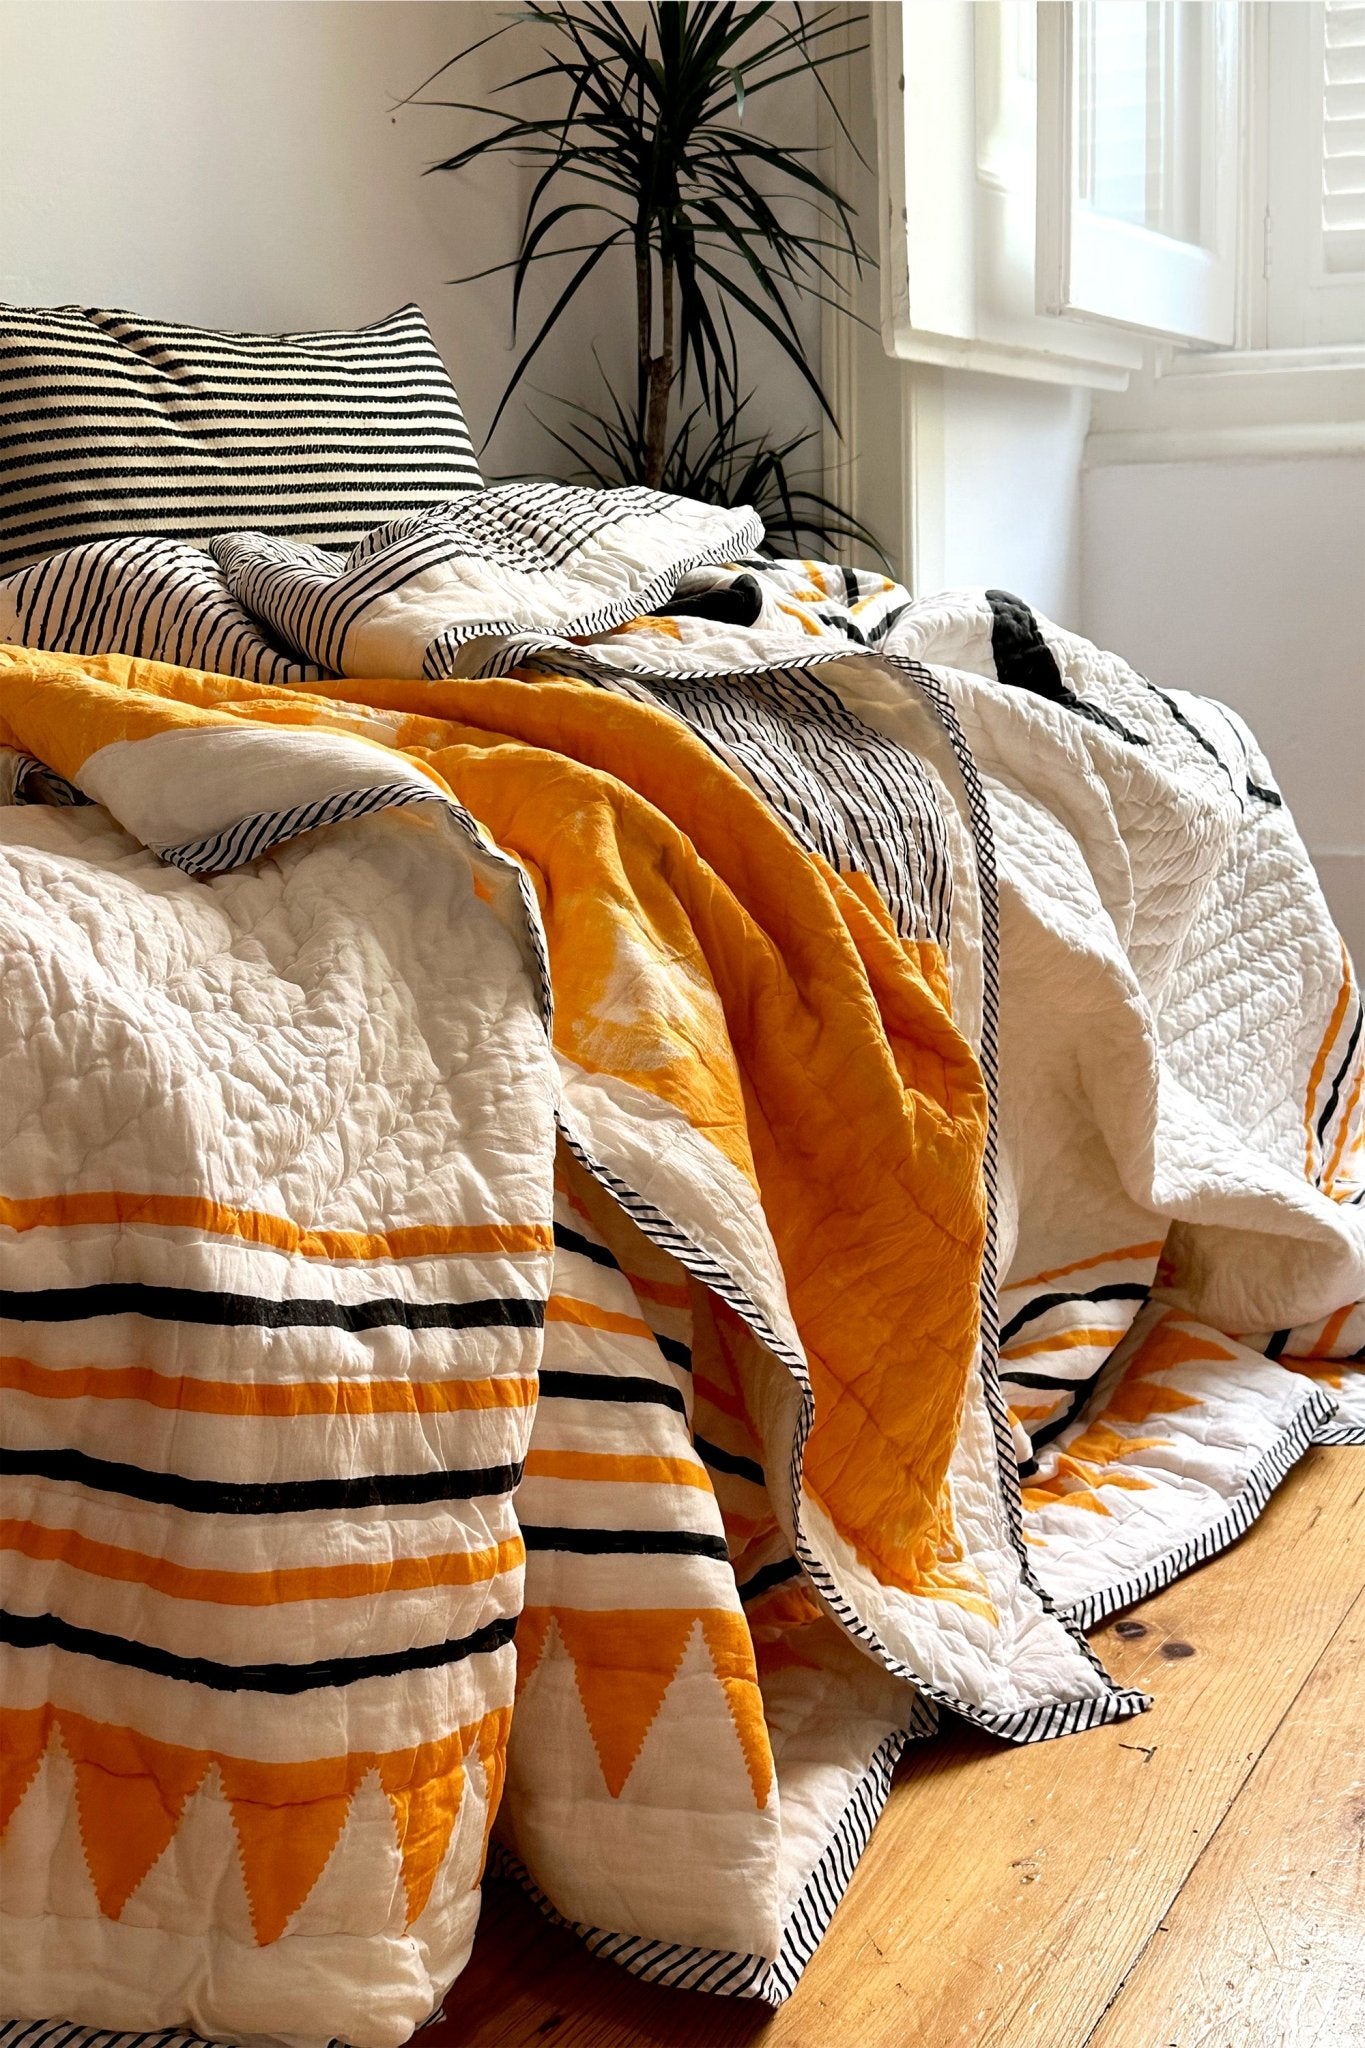 No 2 Block Printed Black, White and Yellow Geometric Quilted Bedspread - Biggs & Hill - Bedspread - Bedspread - black - blanket